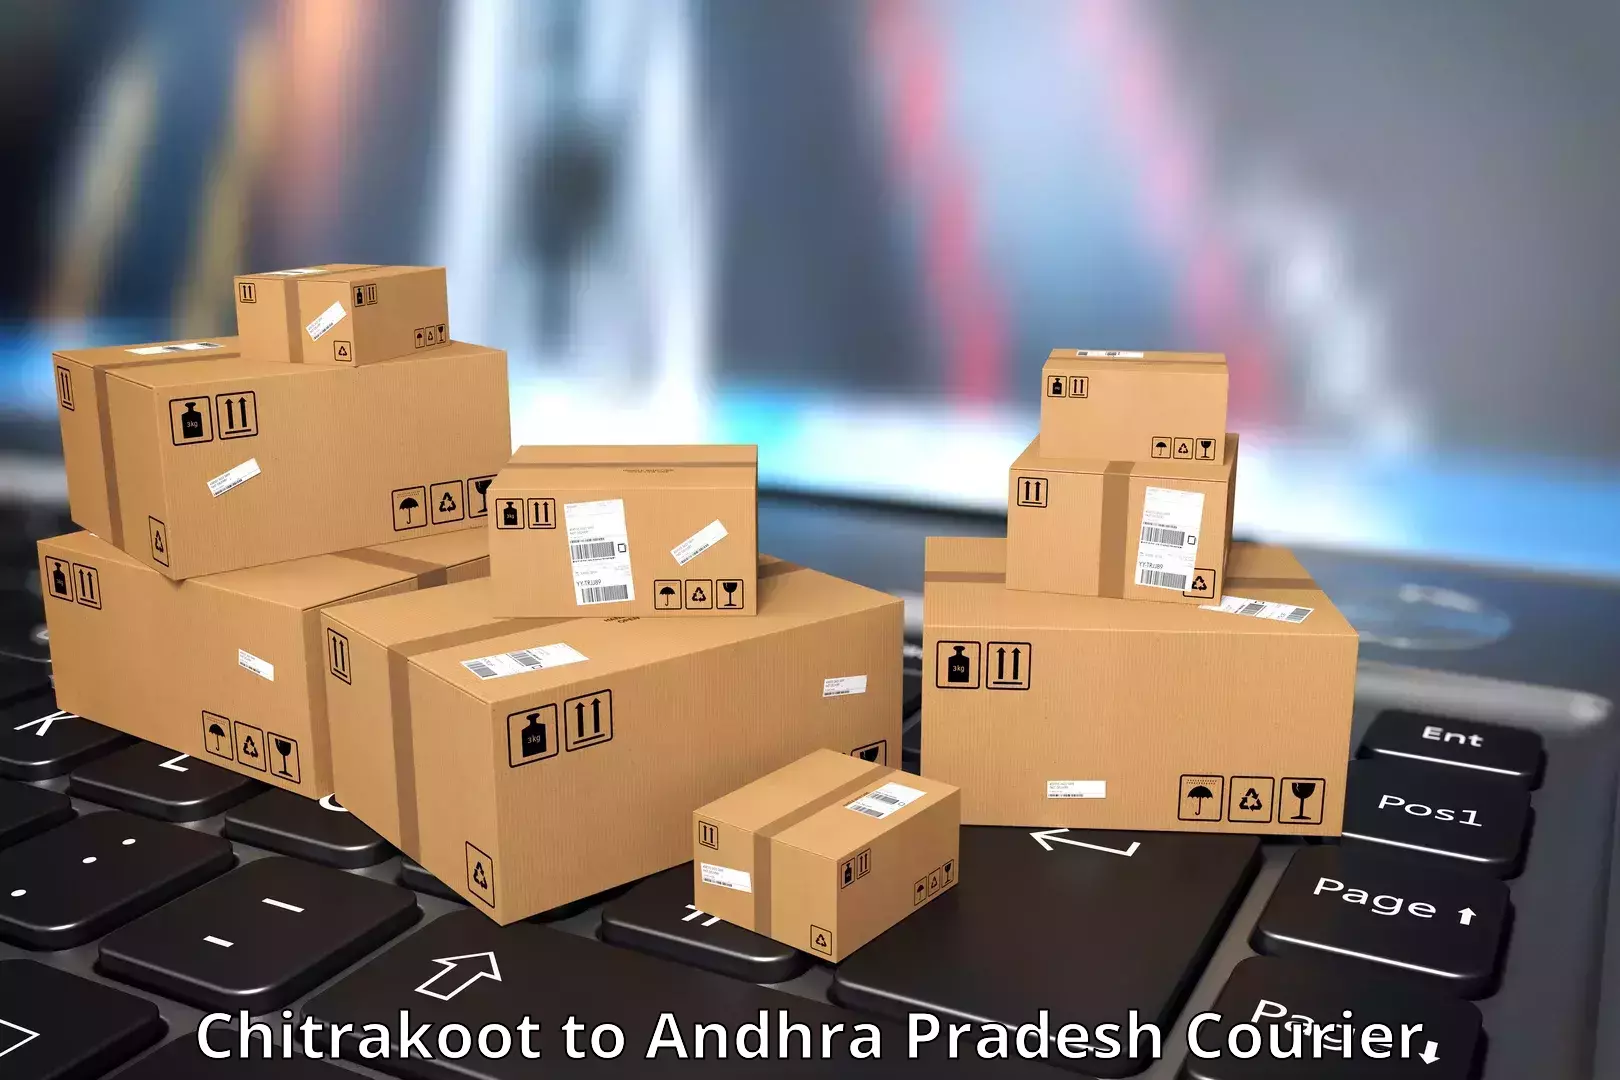 Tech-enabled shipping Chitrakoot to Visakhapatnam Port